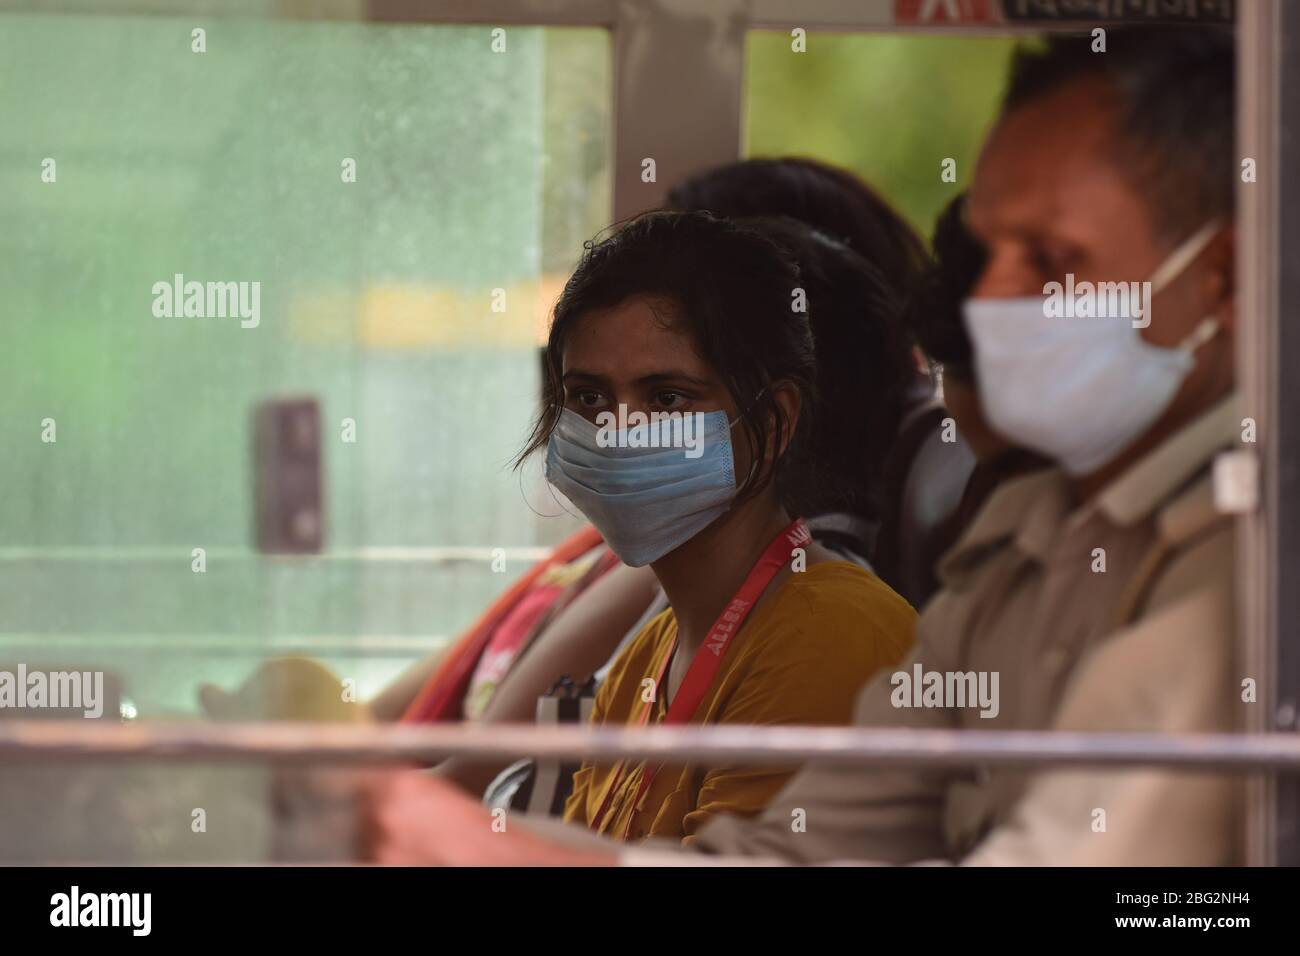 Prayagraj, Uttar Pradesh, India. 20th Apr, 2020. Prayagraj: Stranded Students get out of a bus arranged by the Uttar Pradesh government to drive them from Kota in Rajasthan state during a nationwide lockdown imposed as a preventive measure against the COVID-19 coronavirus, in Prayagraj on Monday, April 20, 2020. Credit: Prabhat Kumar Verma/ZUMA Wire/Alamy Live News Stock Photo